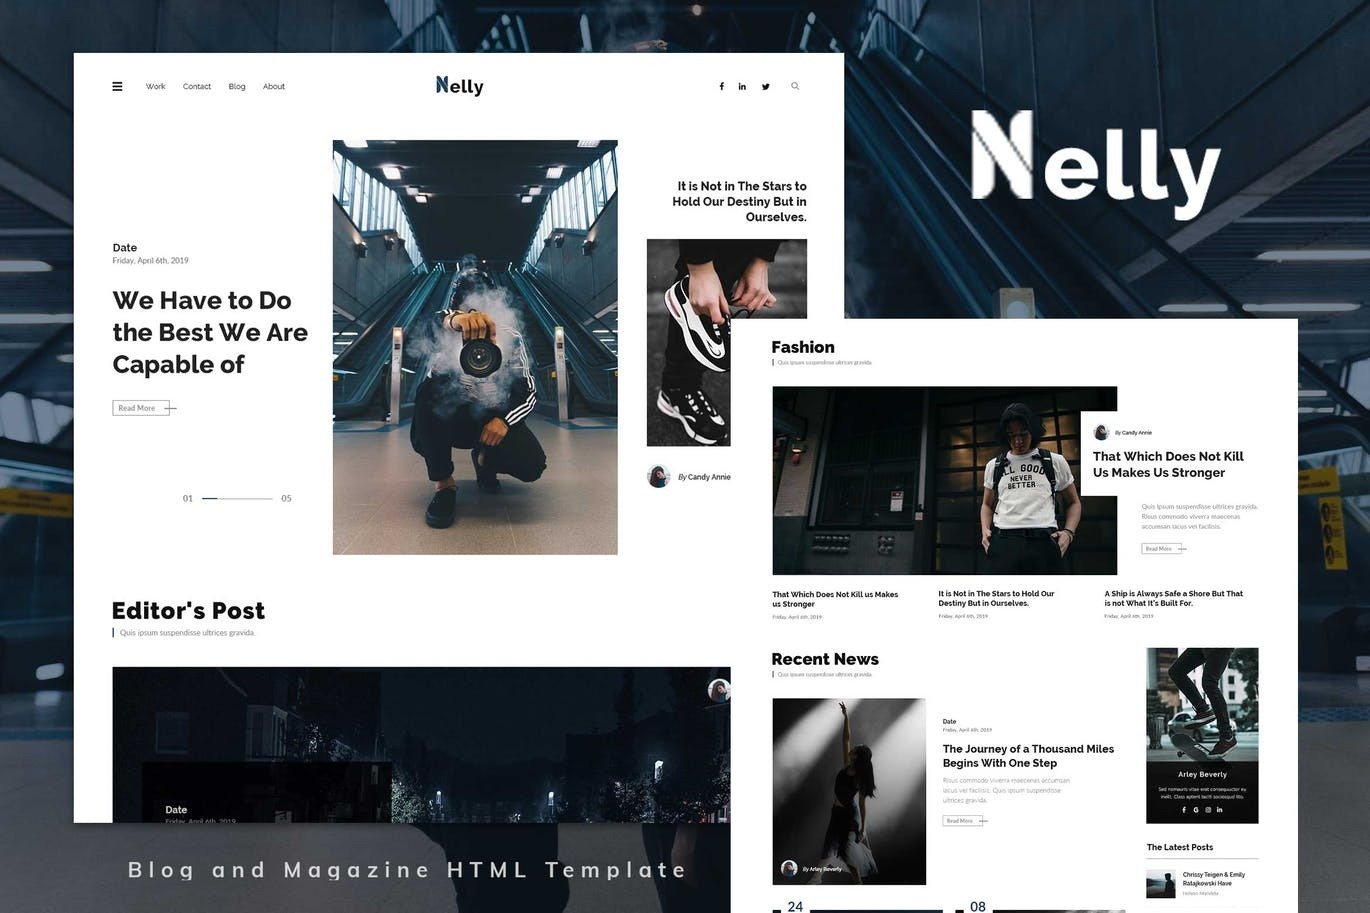 Nelly - Blog and Magazine HTML Template